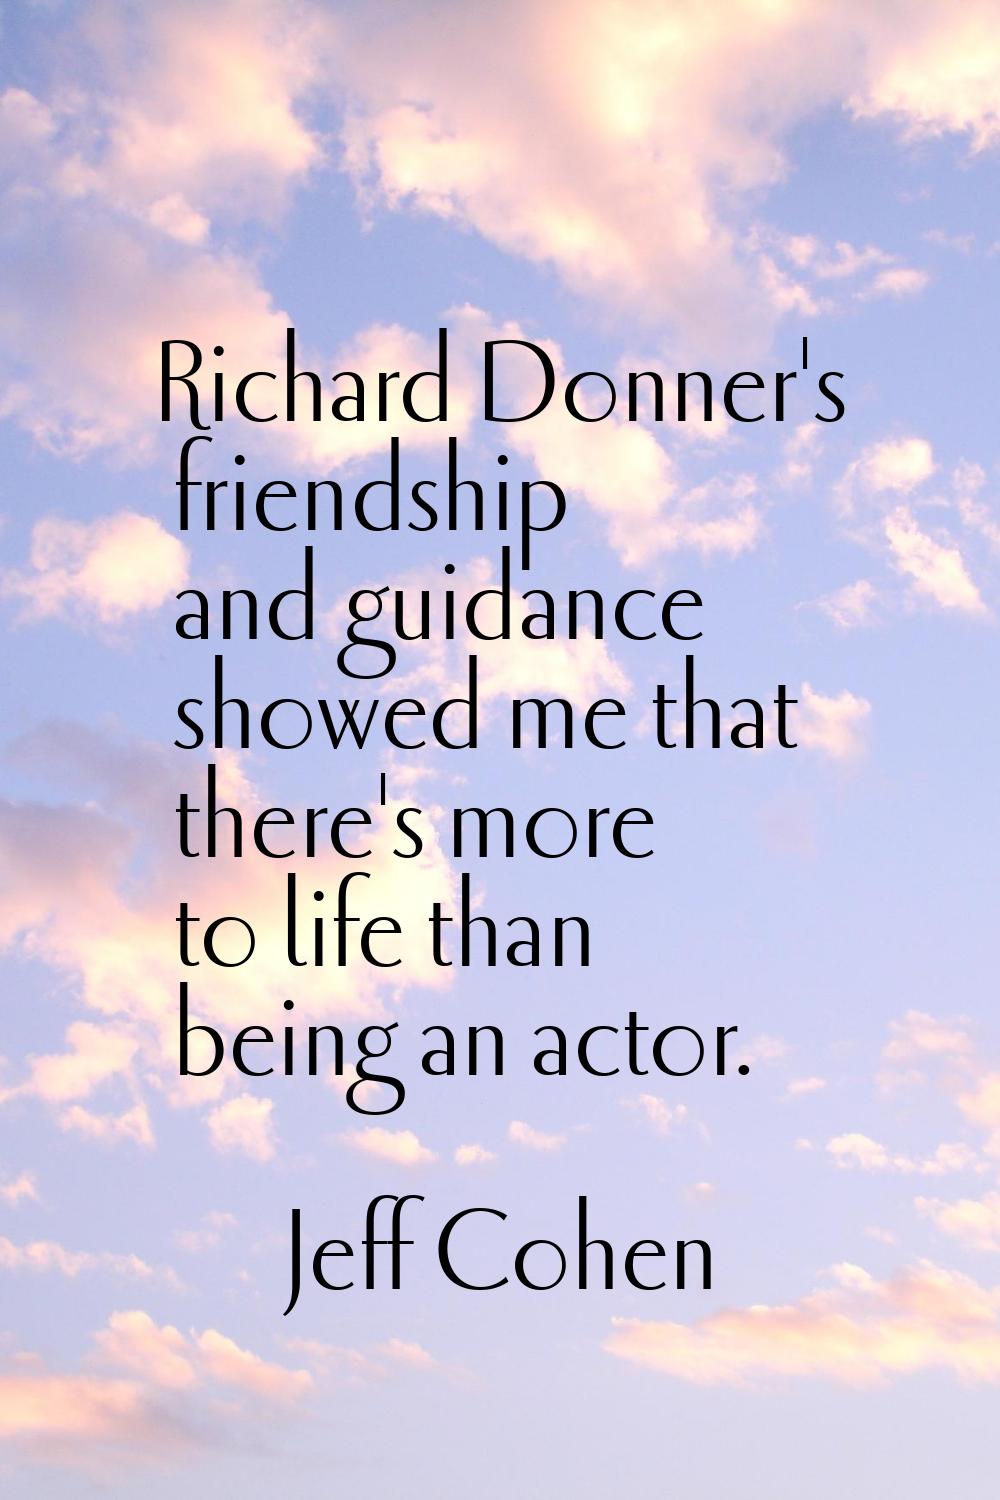 Richard Donner's friendship and guidance showed me that there's more to life than being an actor.